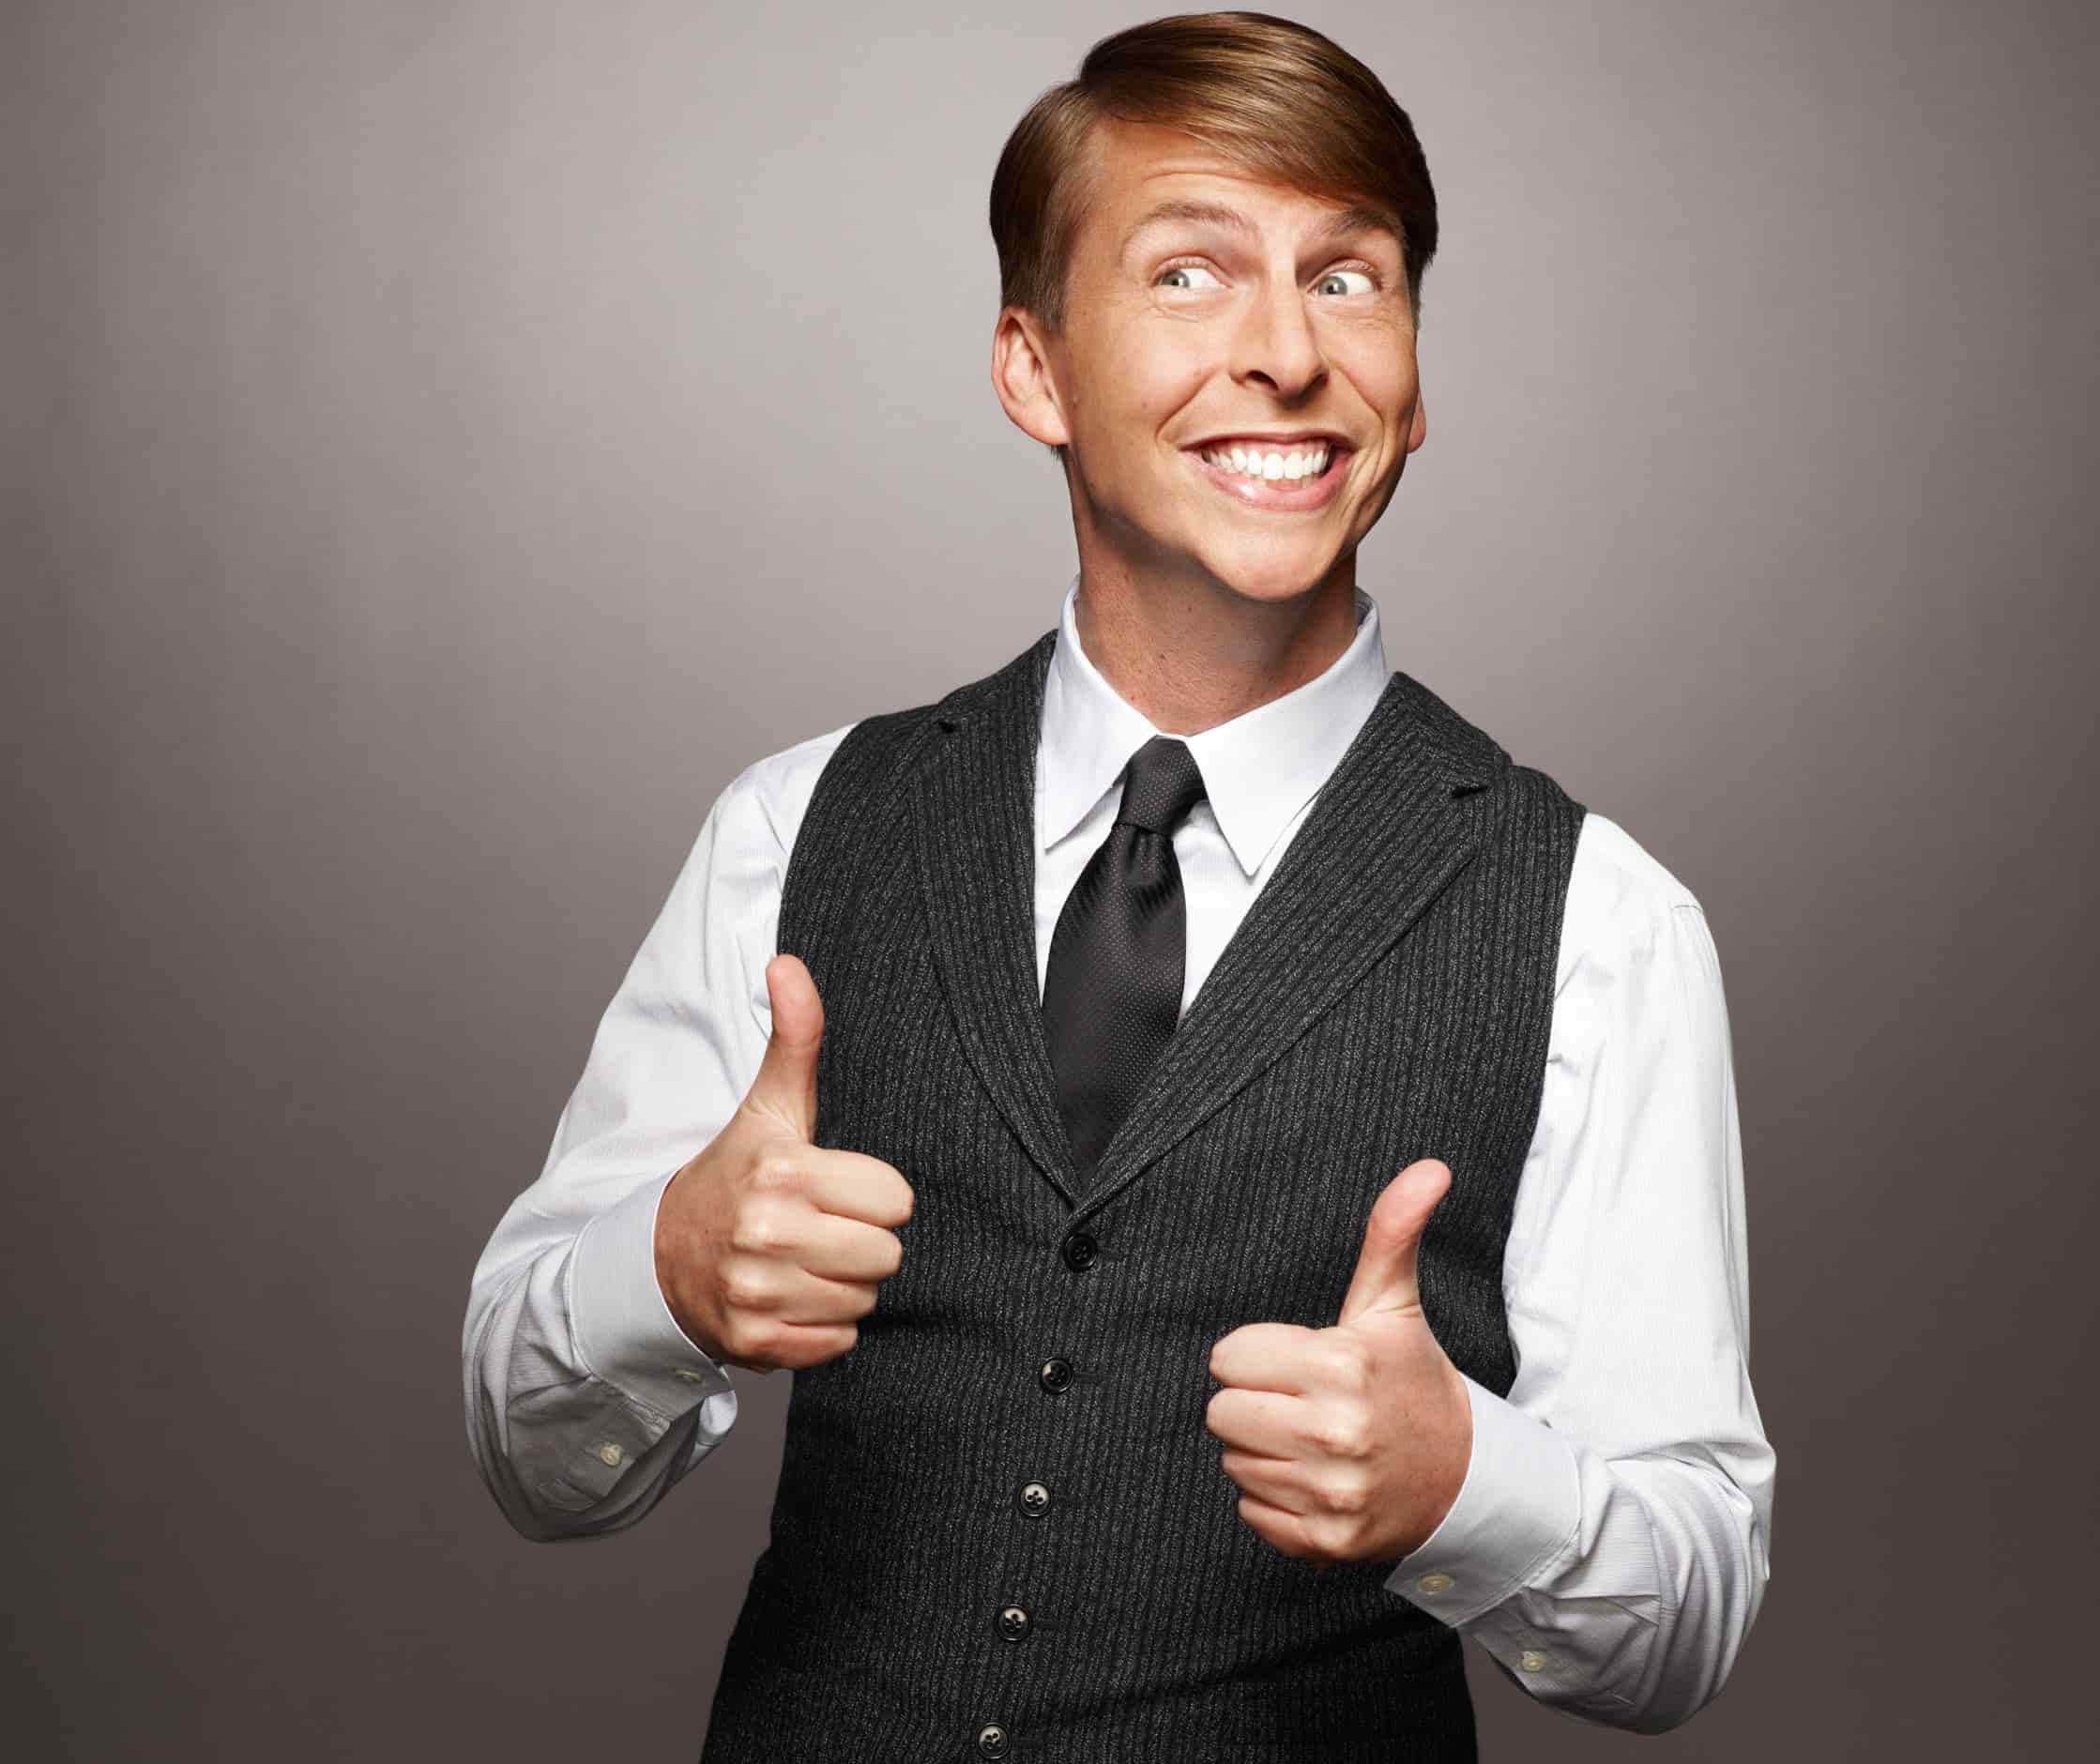 30 Rock star Jack McBrayer to join the West End cast of Waitress